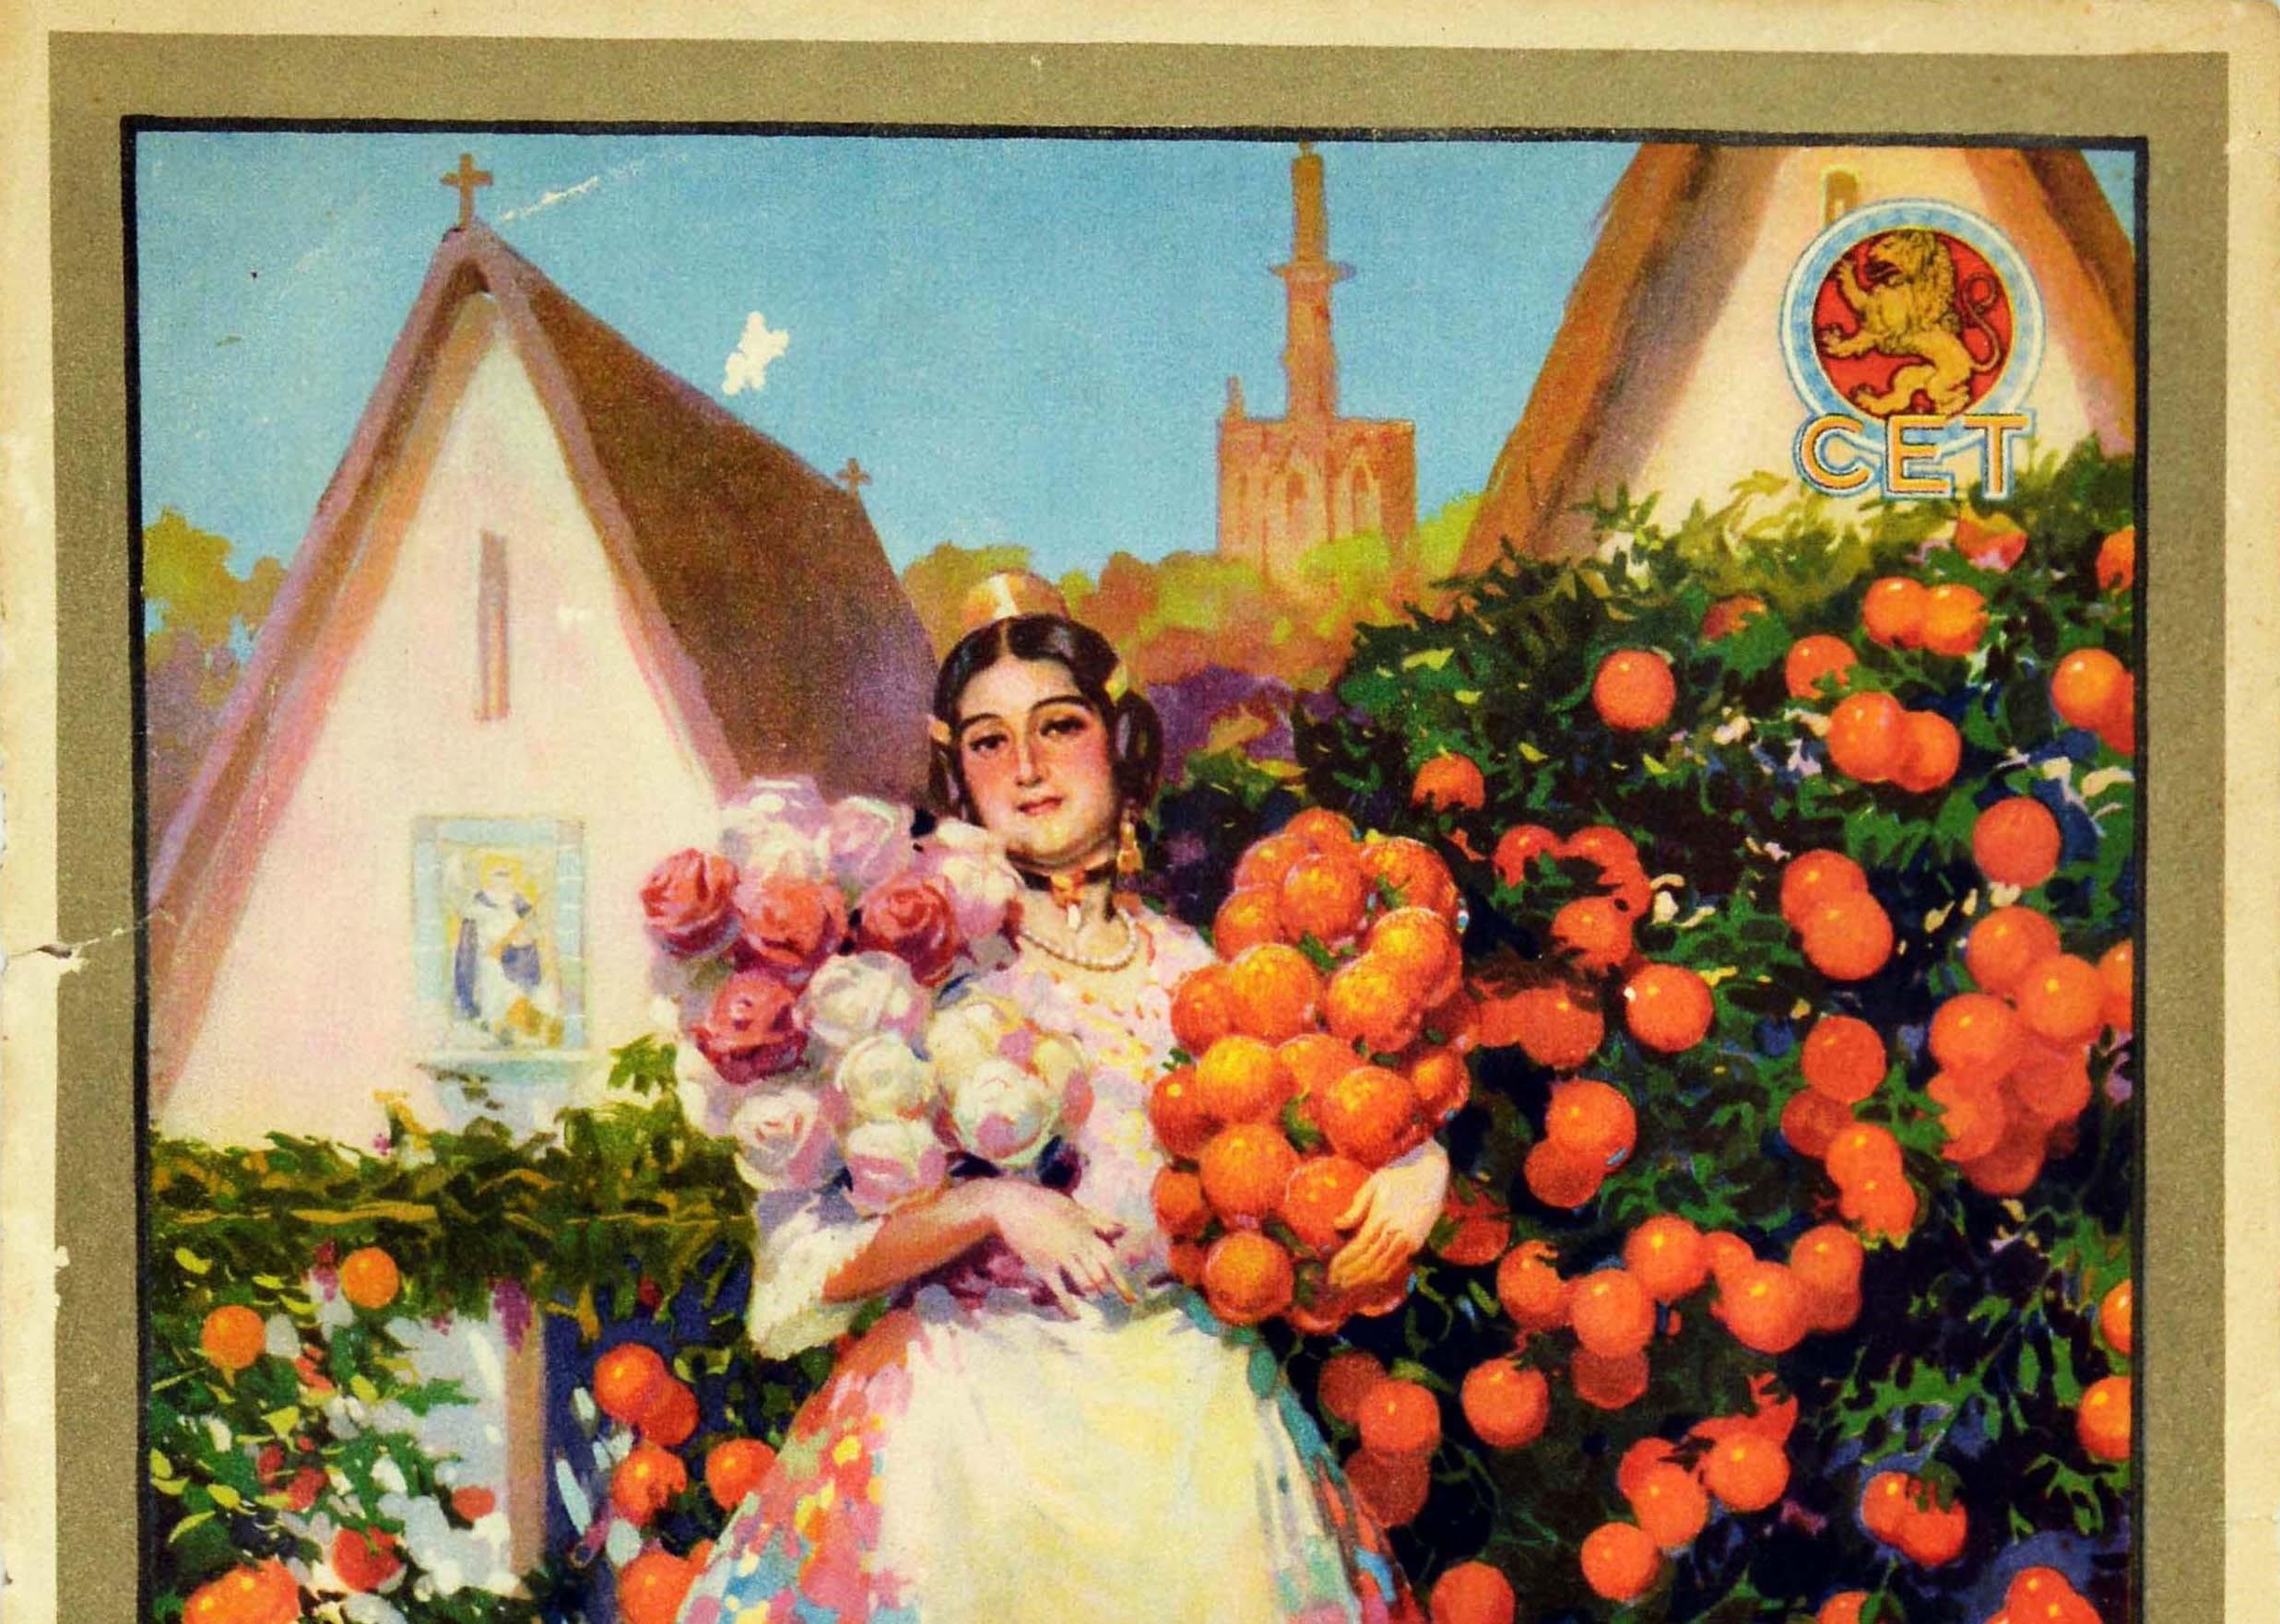 Original vintage travel poster - Besuchen Sie Valencia der Blumengarten Spaniens / Visit Valencia the flower garden of Spain - featuring colourful artwork by the Spanish painter Jose Segrelles Albert (1885-1969) depicting a young lady in a floral